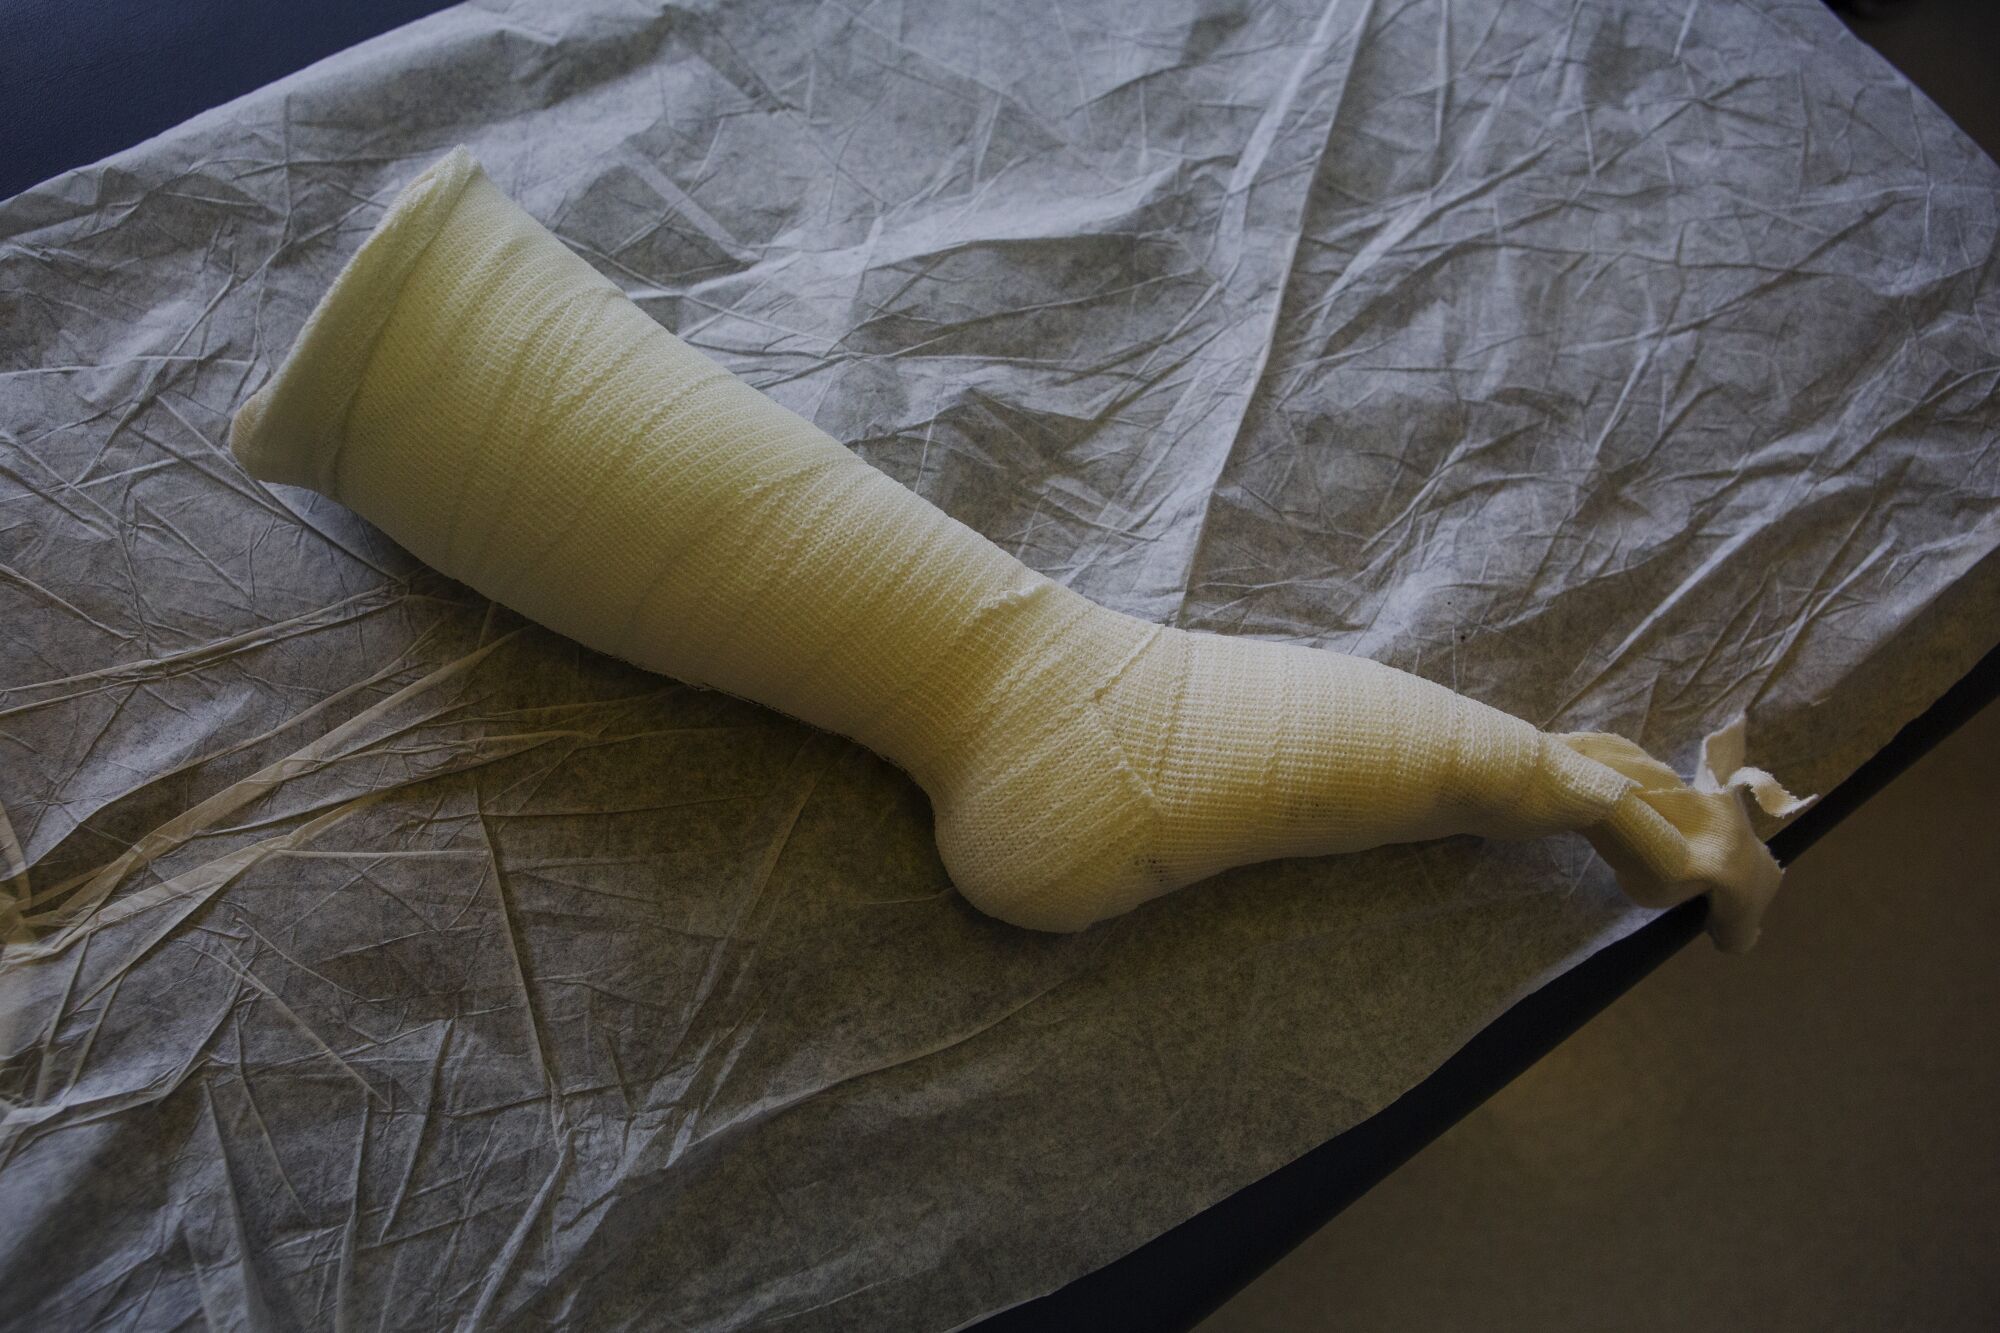 A cast of Efraín's foot lays on a hospital bed.